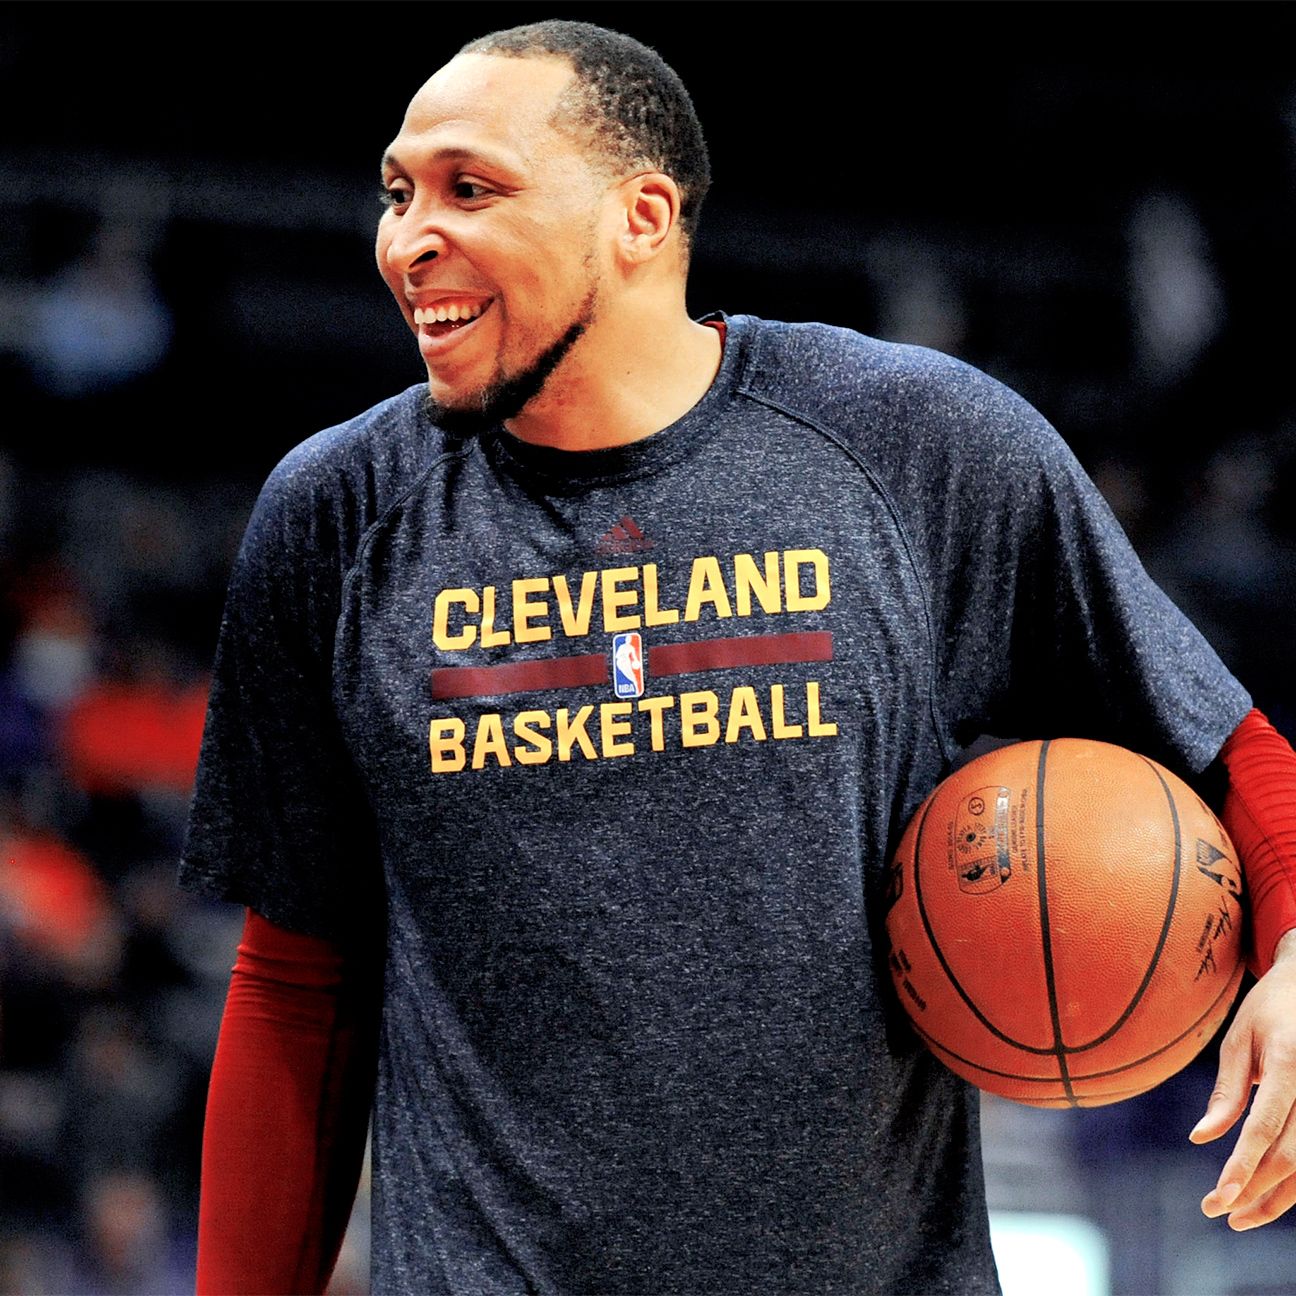 Shawn Marion of Cleveland Cavaliers says he's retiring after 16 seasons1296 x 1296